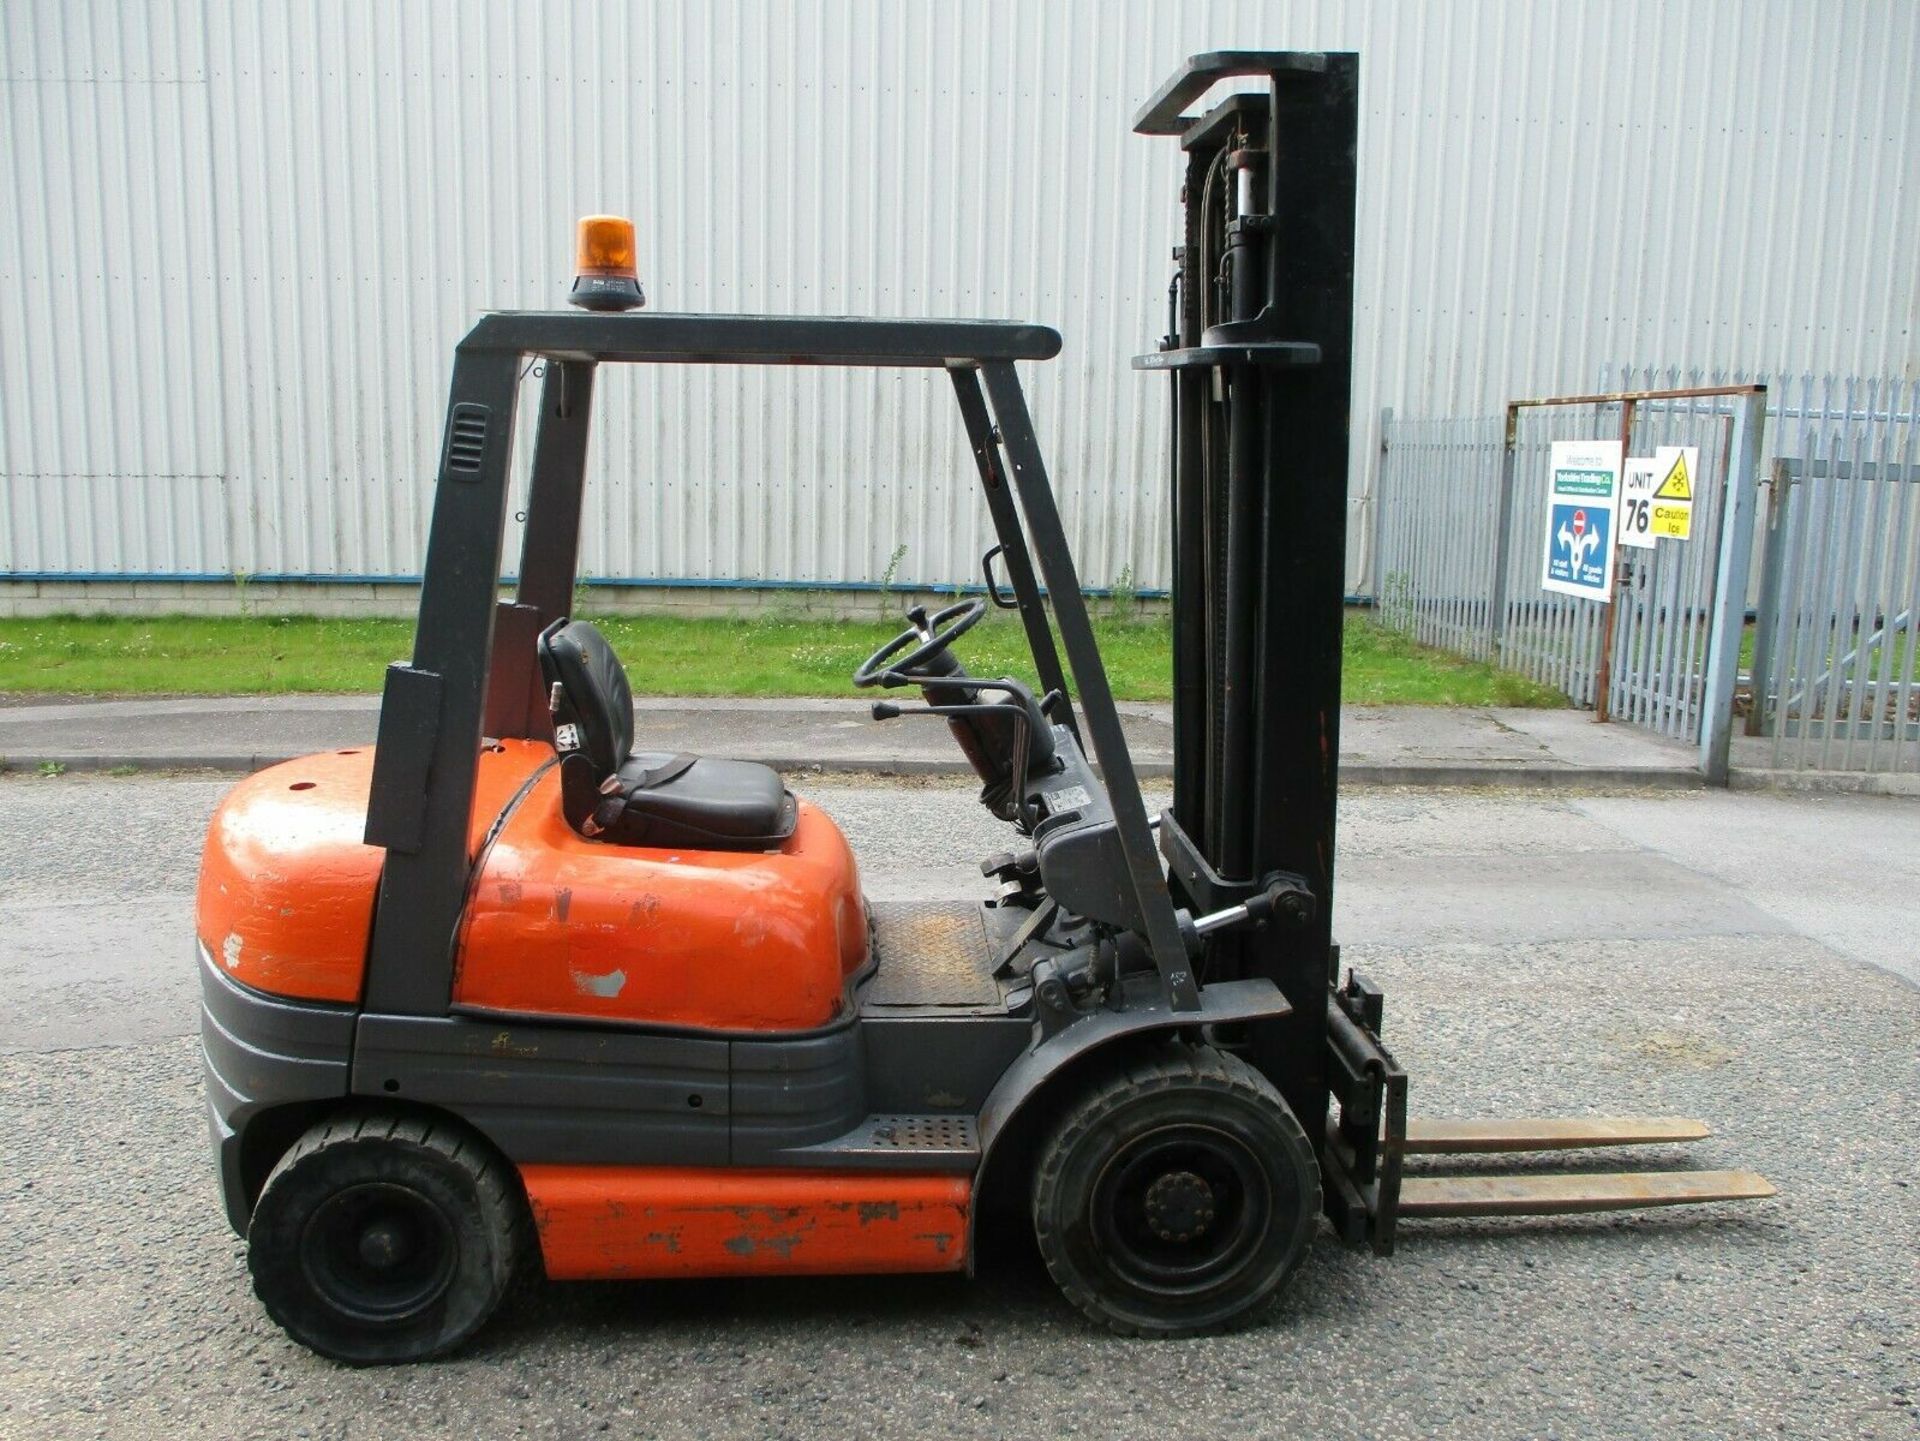 Toyota 6FD25 Forklift 2.5 Ton. Toyota diesel engineSideshiftIn daily useWeighs about 4000 kg - Image 6 of 9